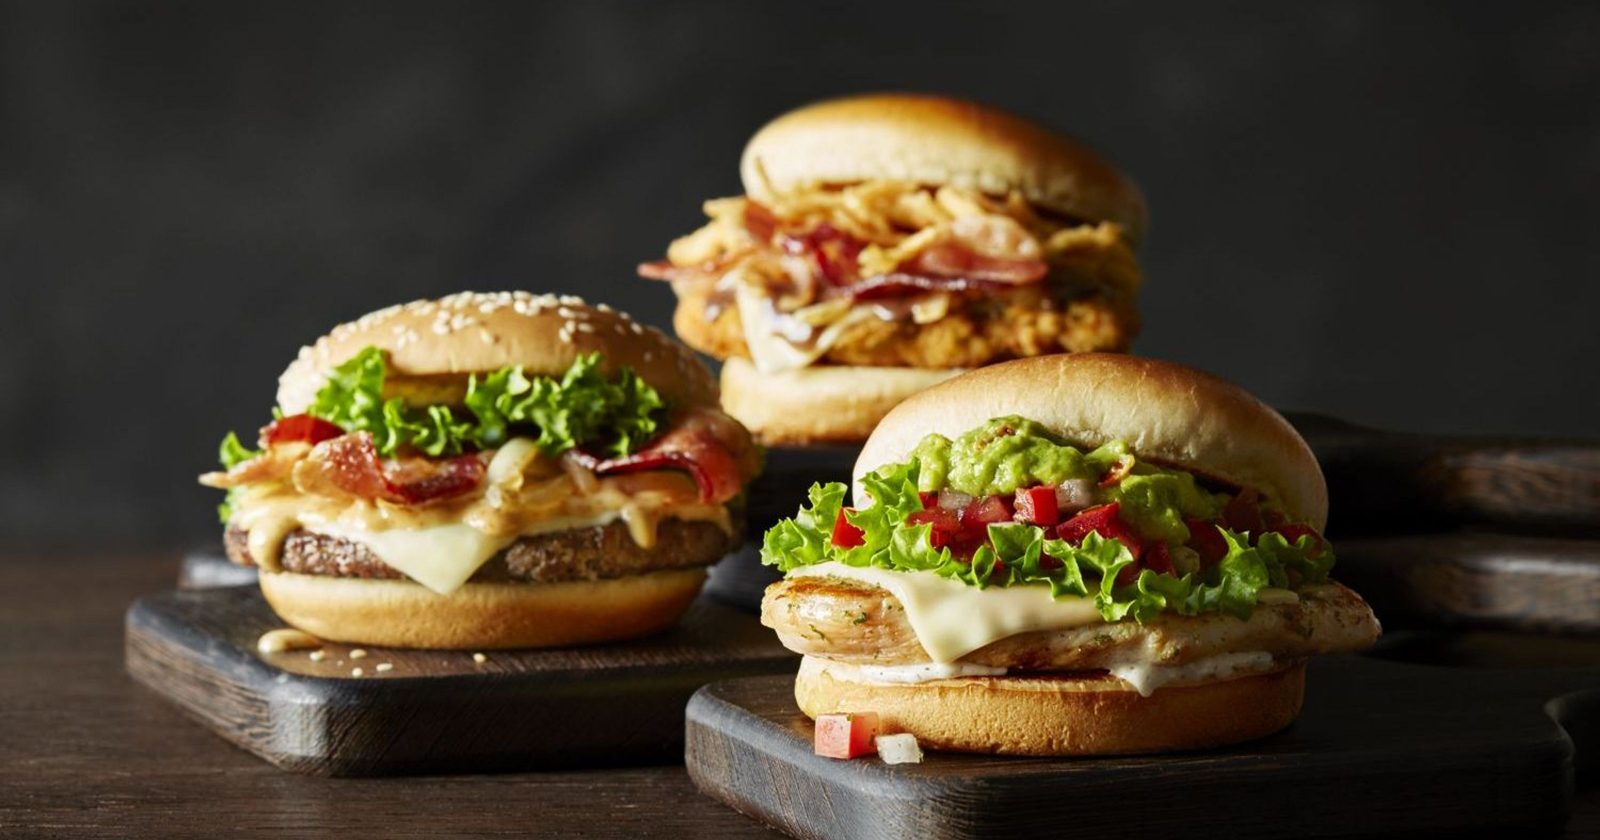 🍔 Plan a Dinner Party With Only Fast Food and We’ll Reveal Your Exact Age mcdonalds sandwiches